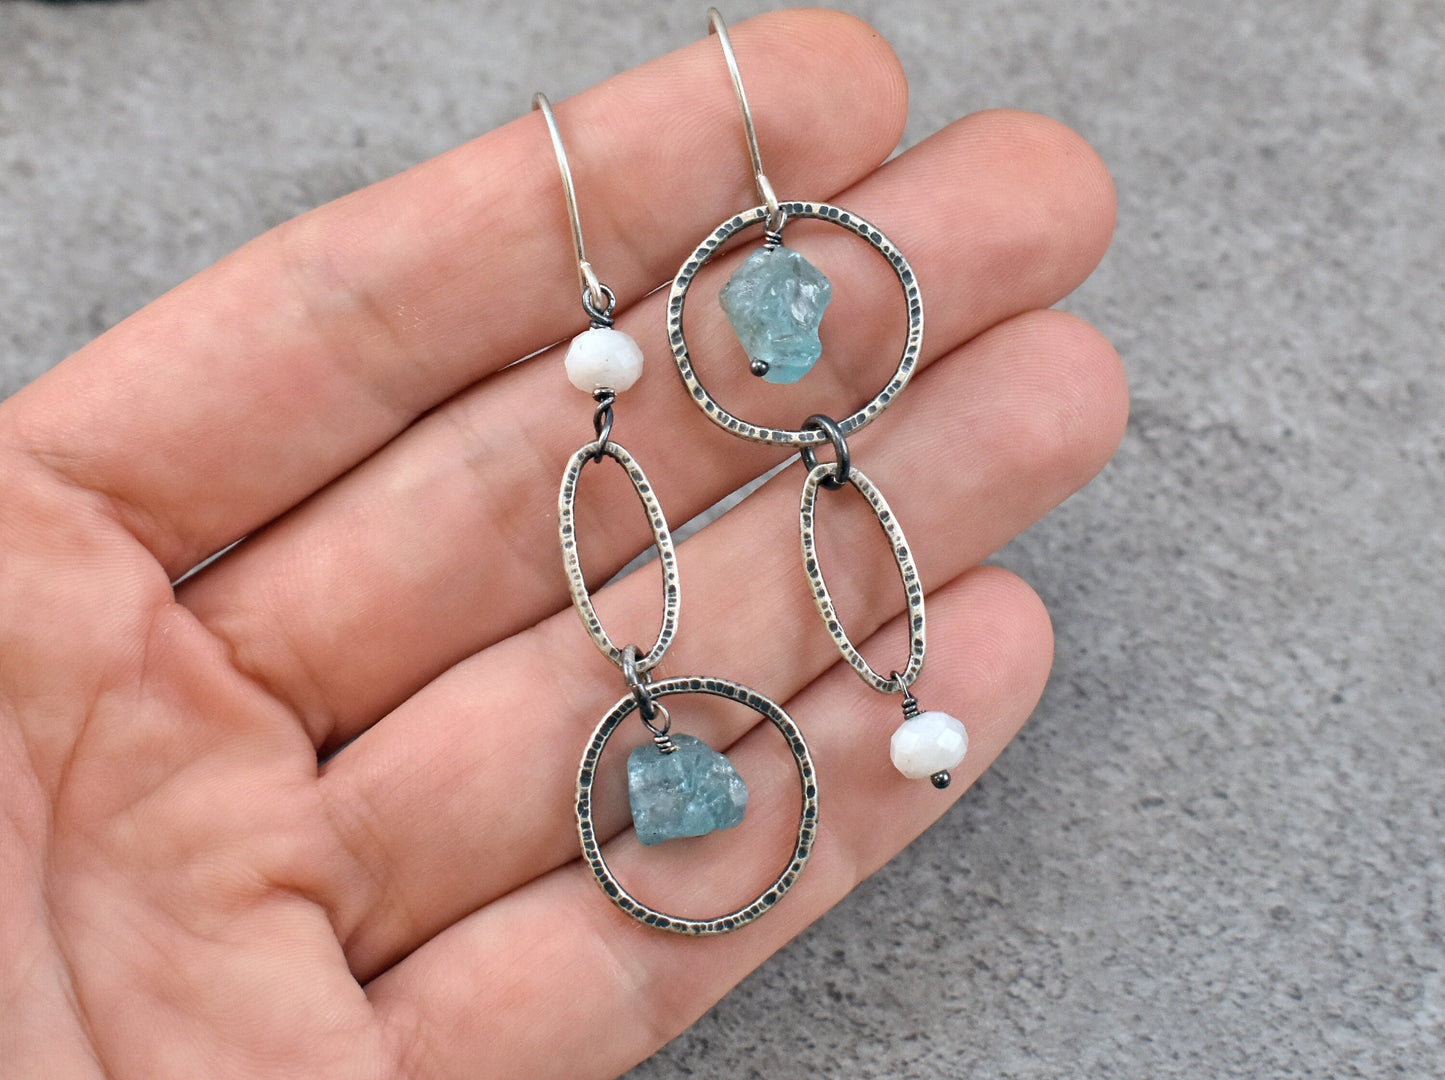 Raw Apatite Asymmetrical Earrings, Rustic Moonstone Sterling Silver Circle Dangles, Natural Rough Blue Stone Jewelry, Artisan Unique